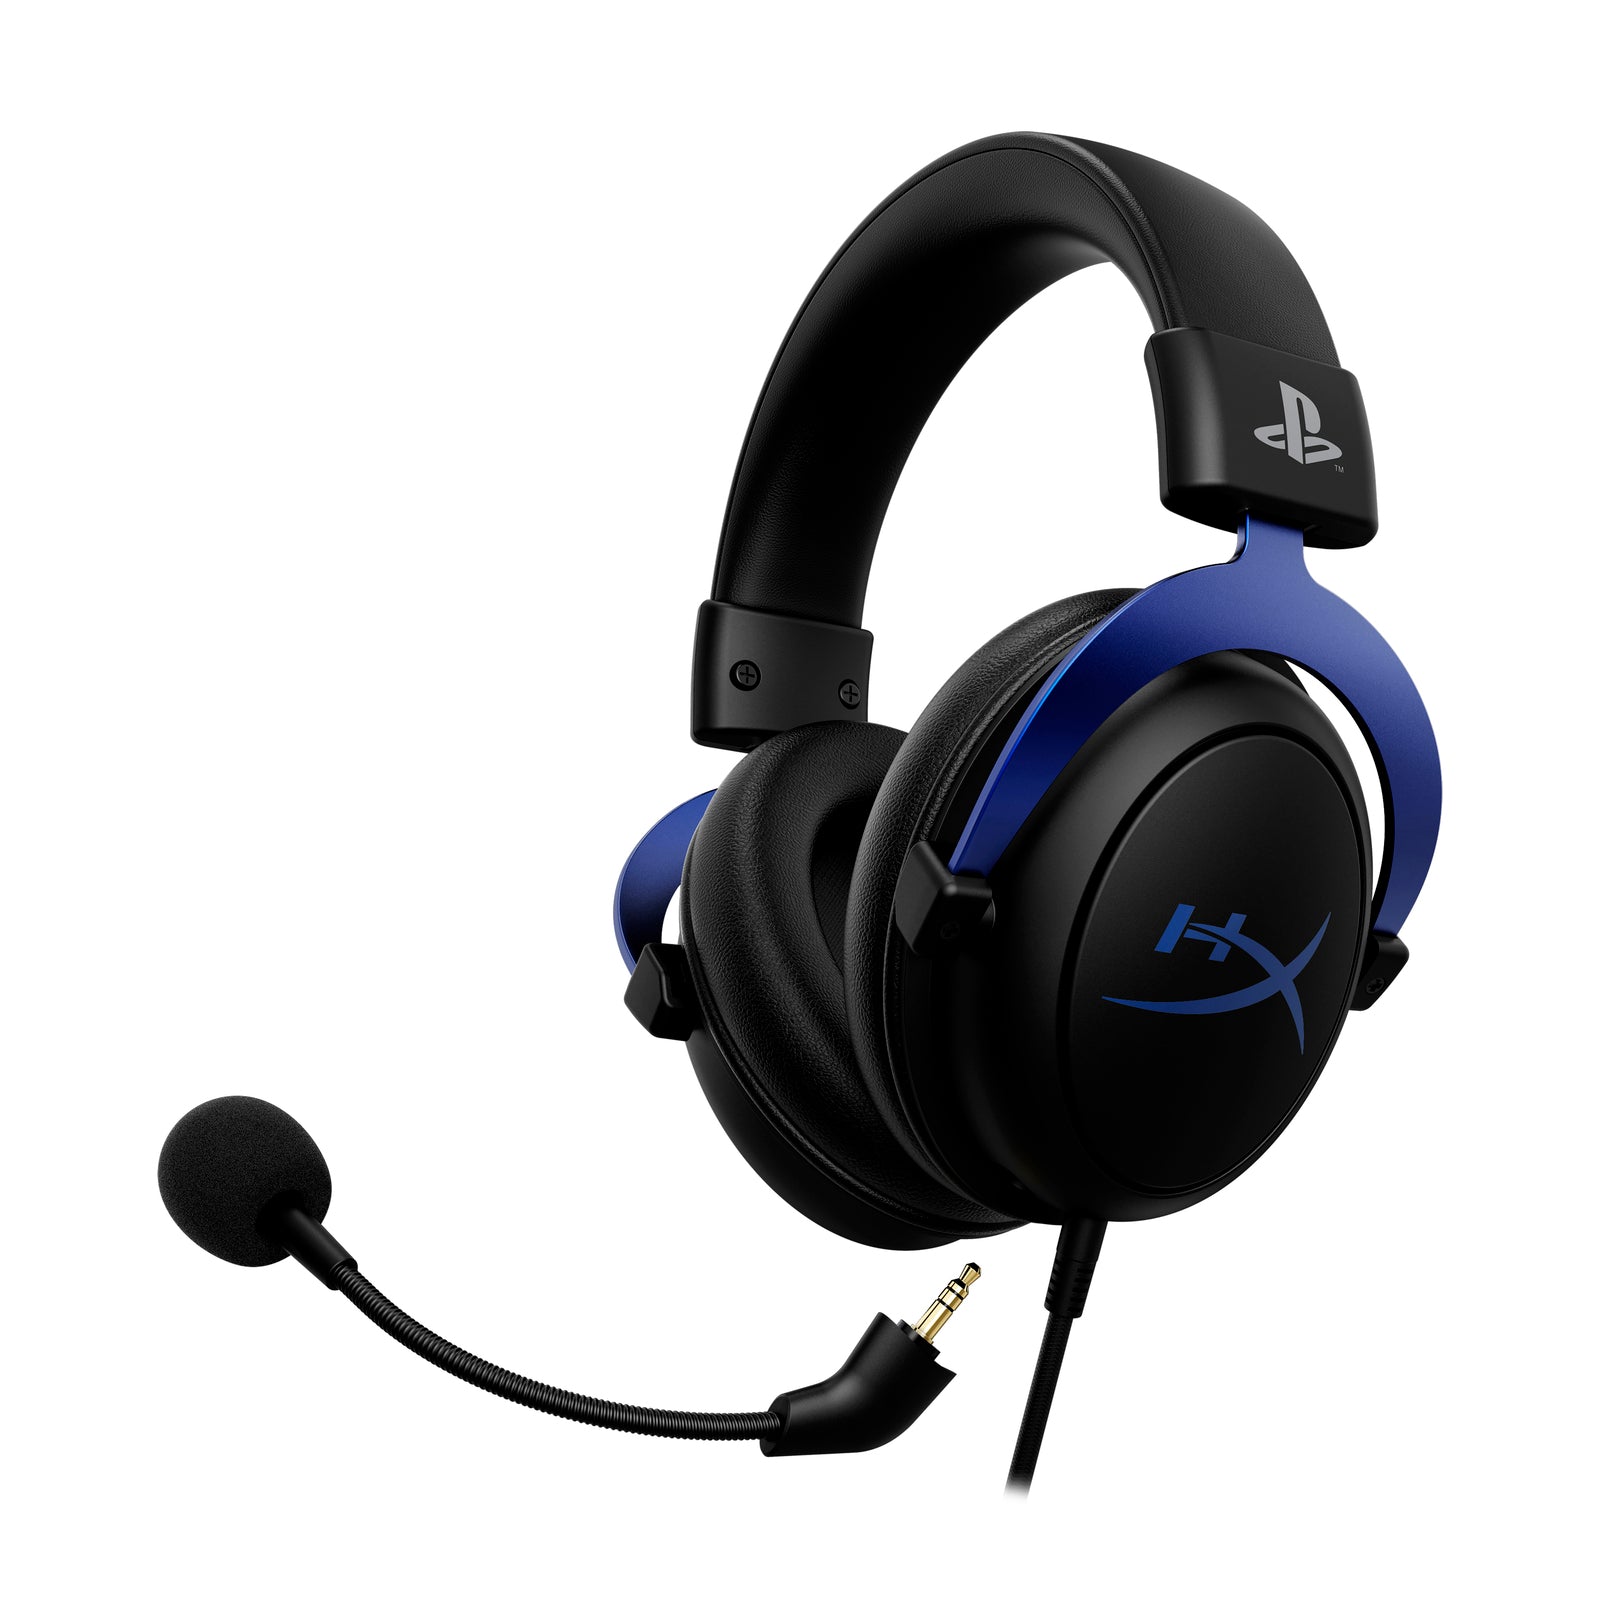 Main view of the HyperX Cloud PS4 Gaming Headset, featuring the detachable microphone